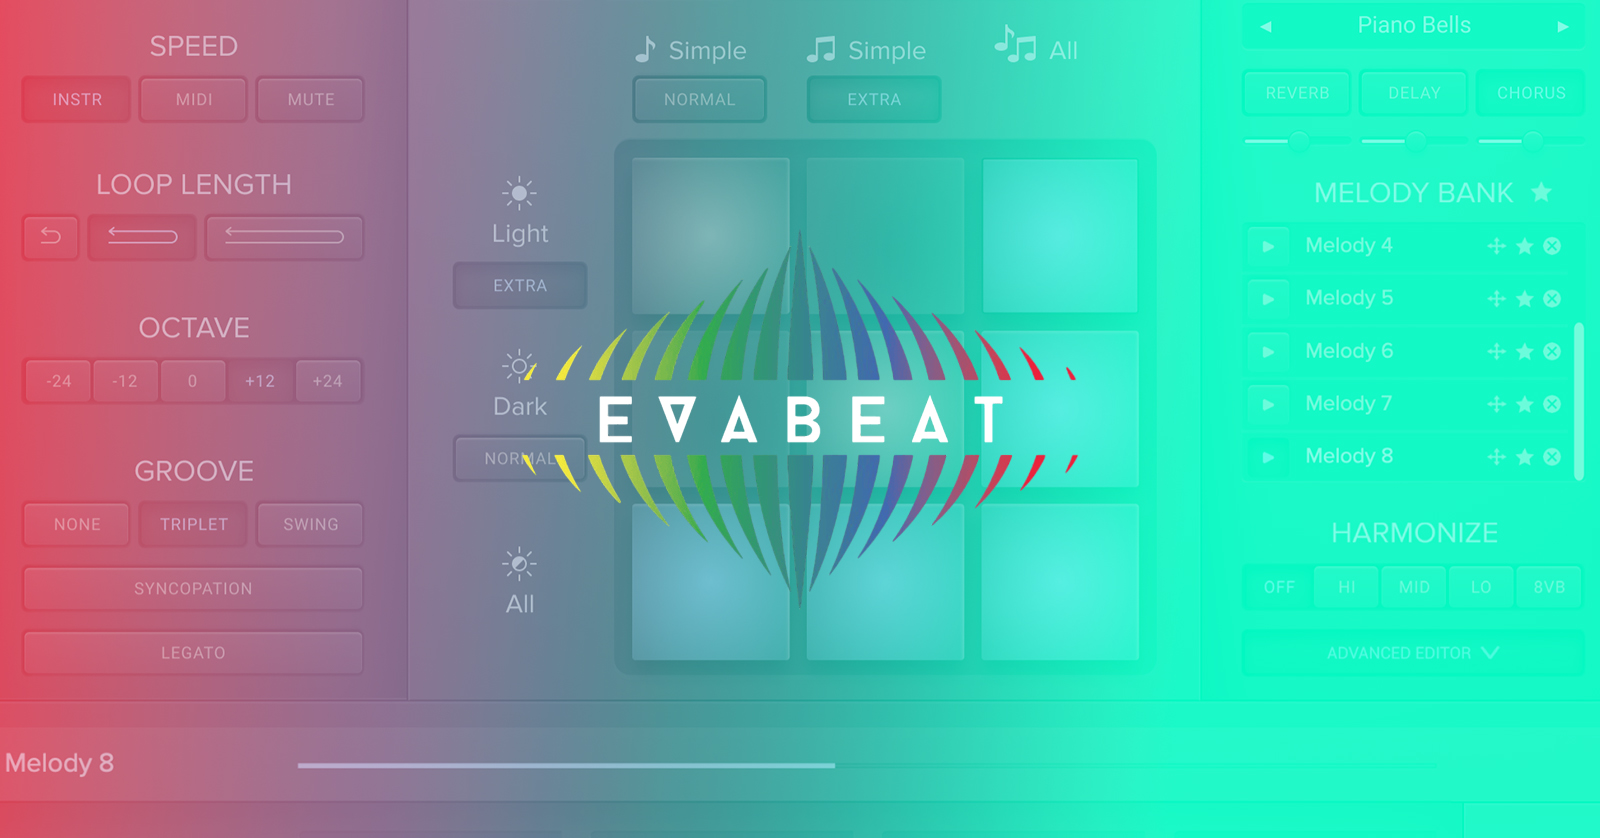 EVABeat-Software-Activation-Instructions-Featured-Image.jpg